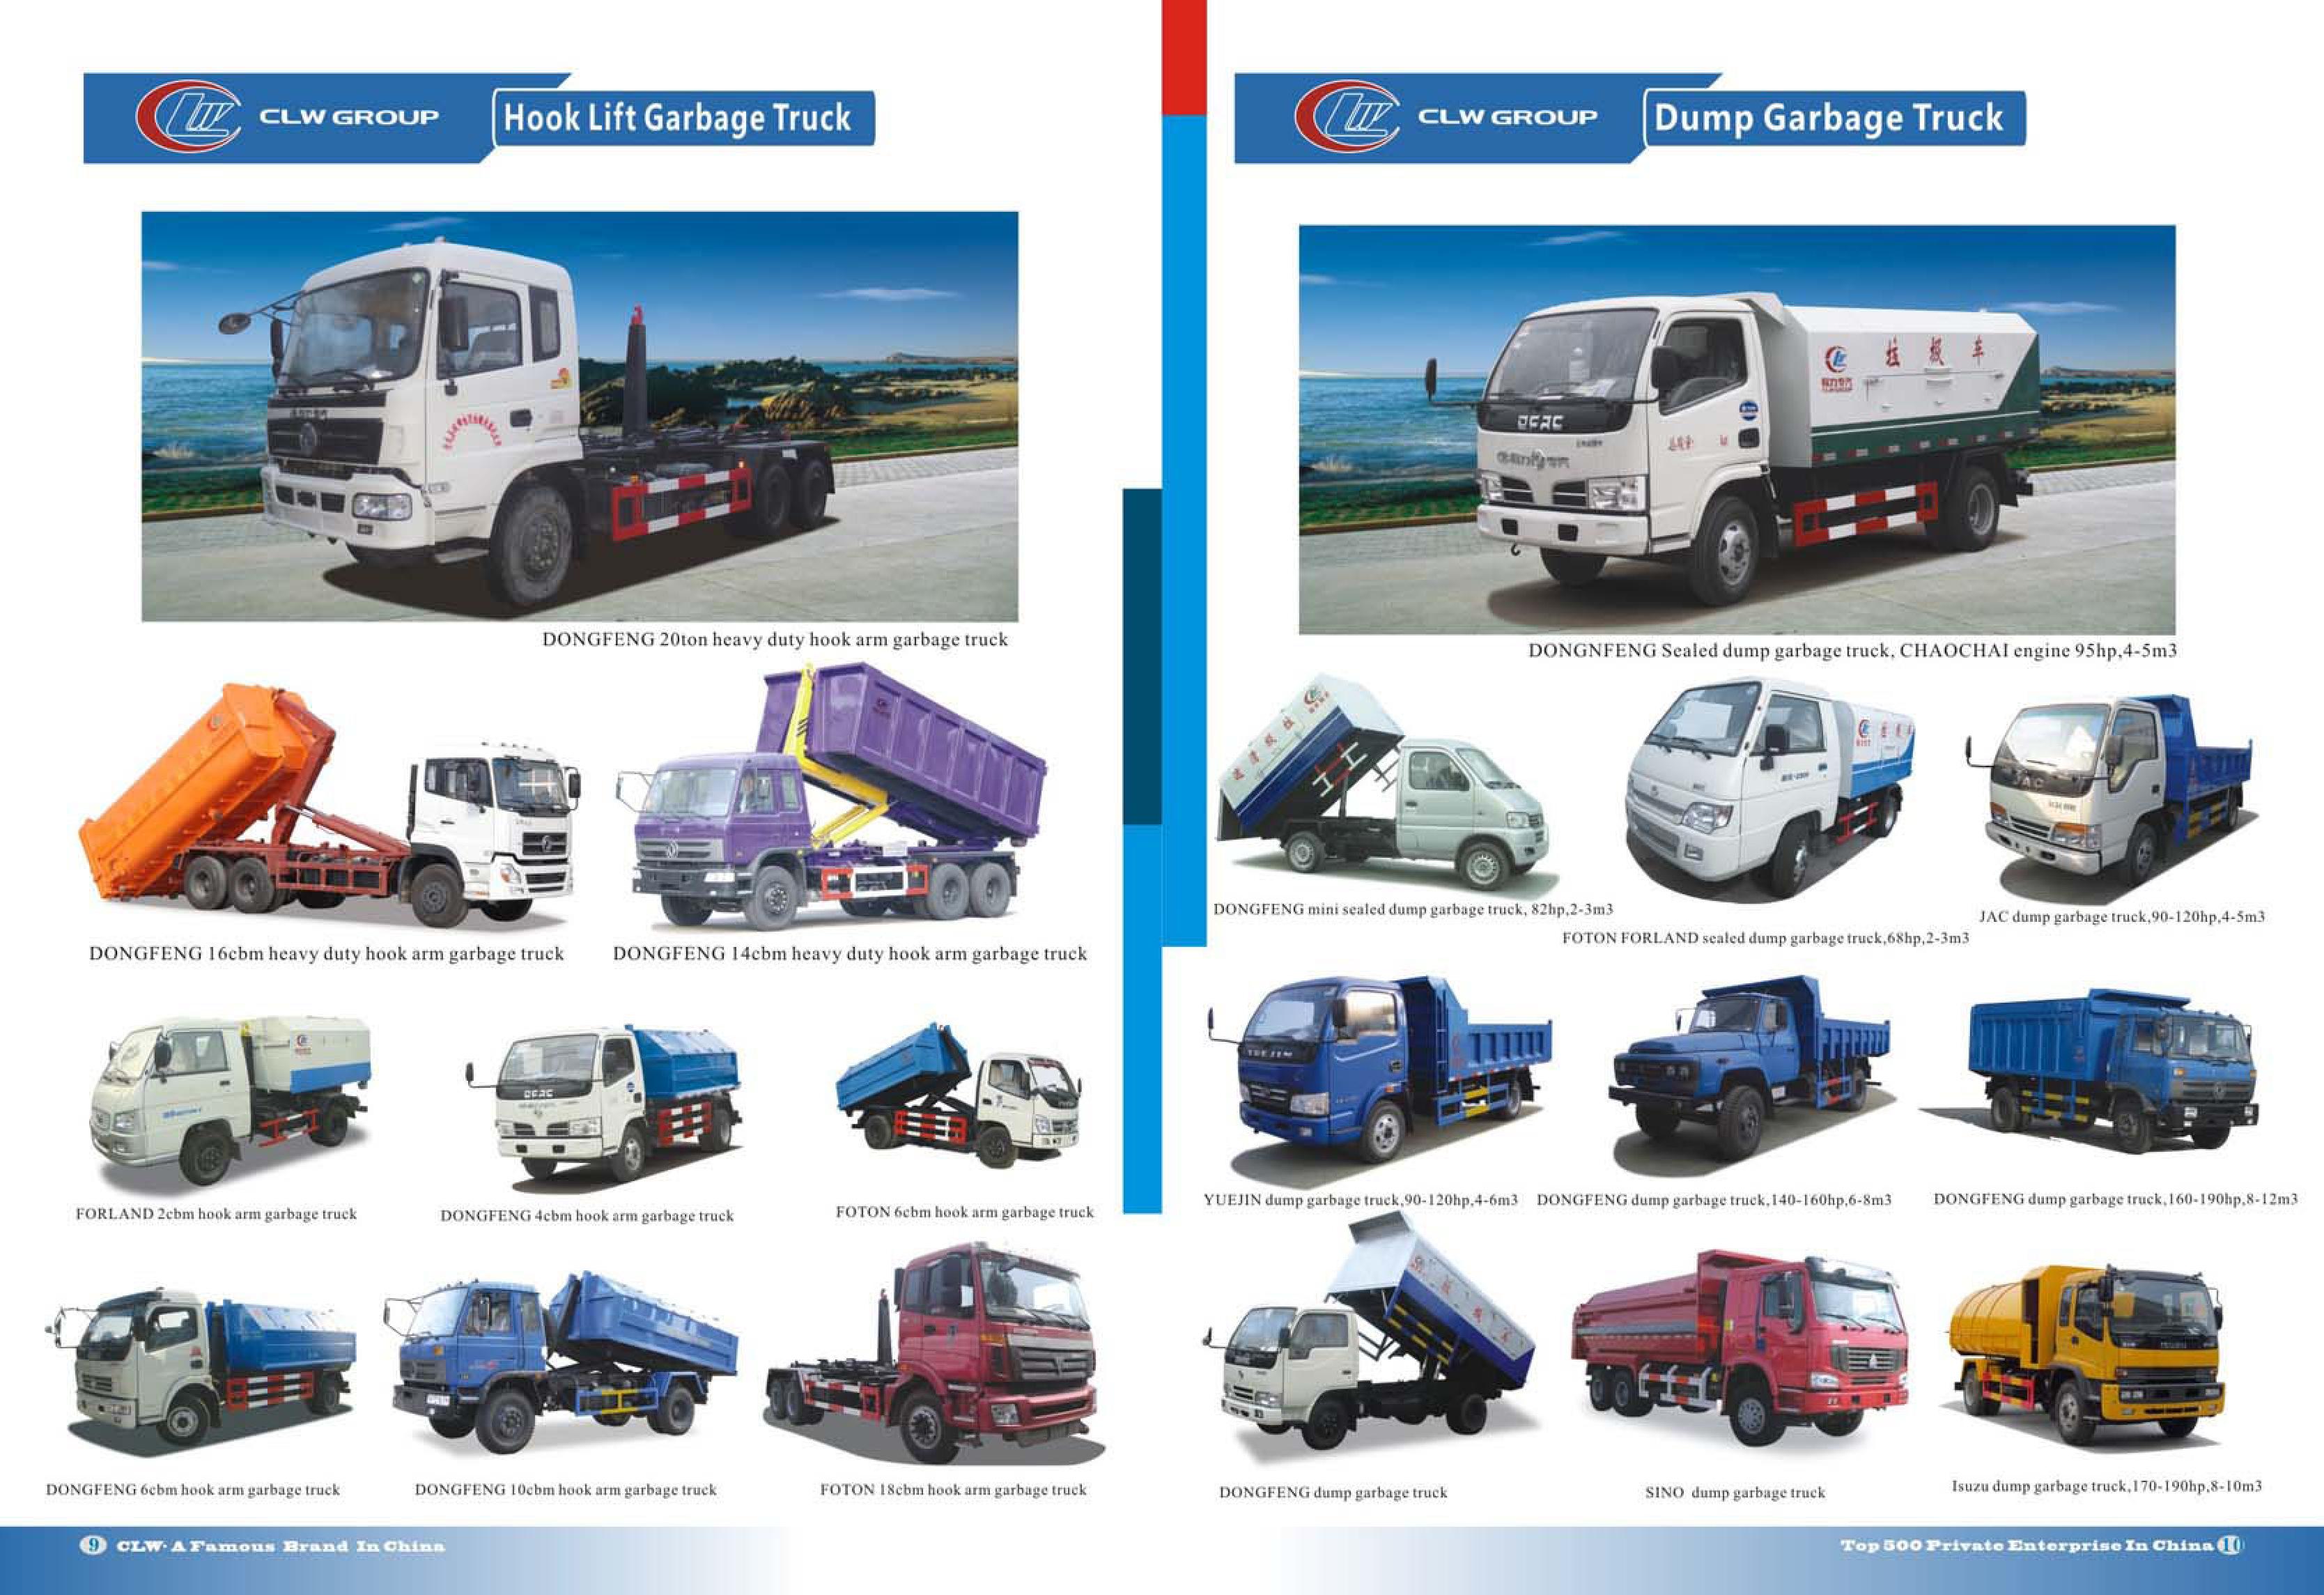 2019 CLW Group Catalog -_5.jpg